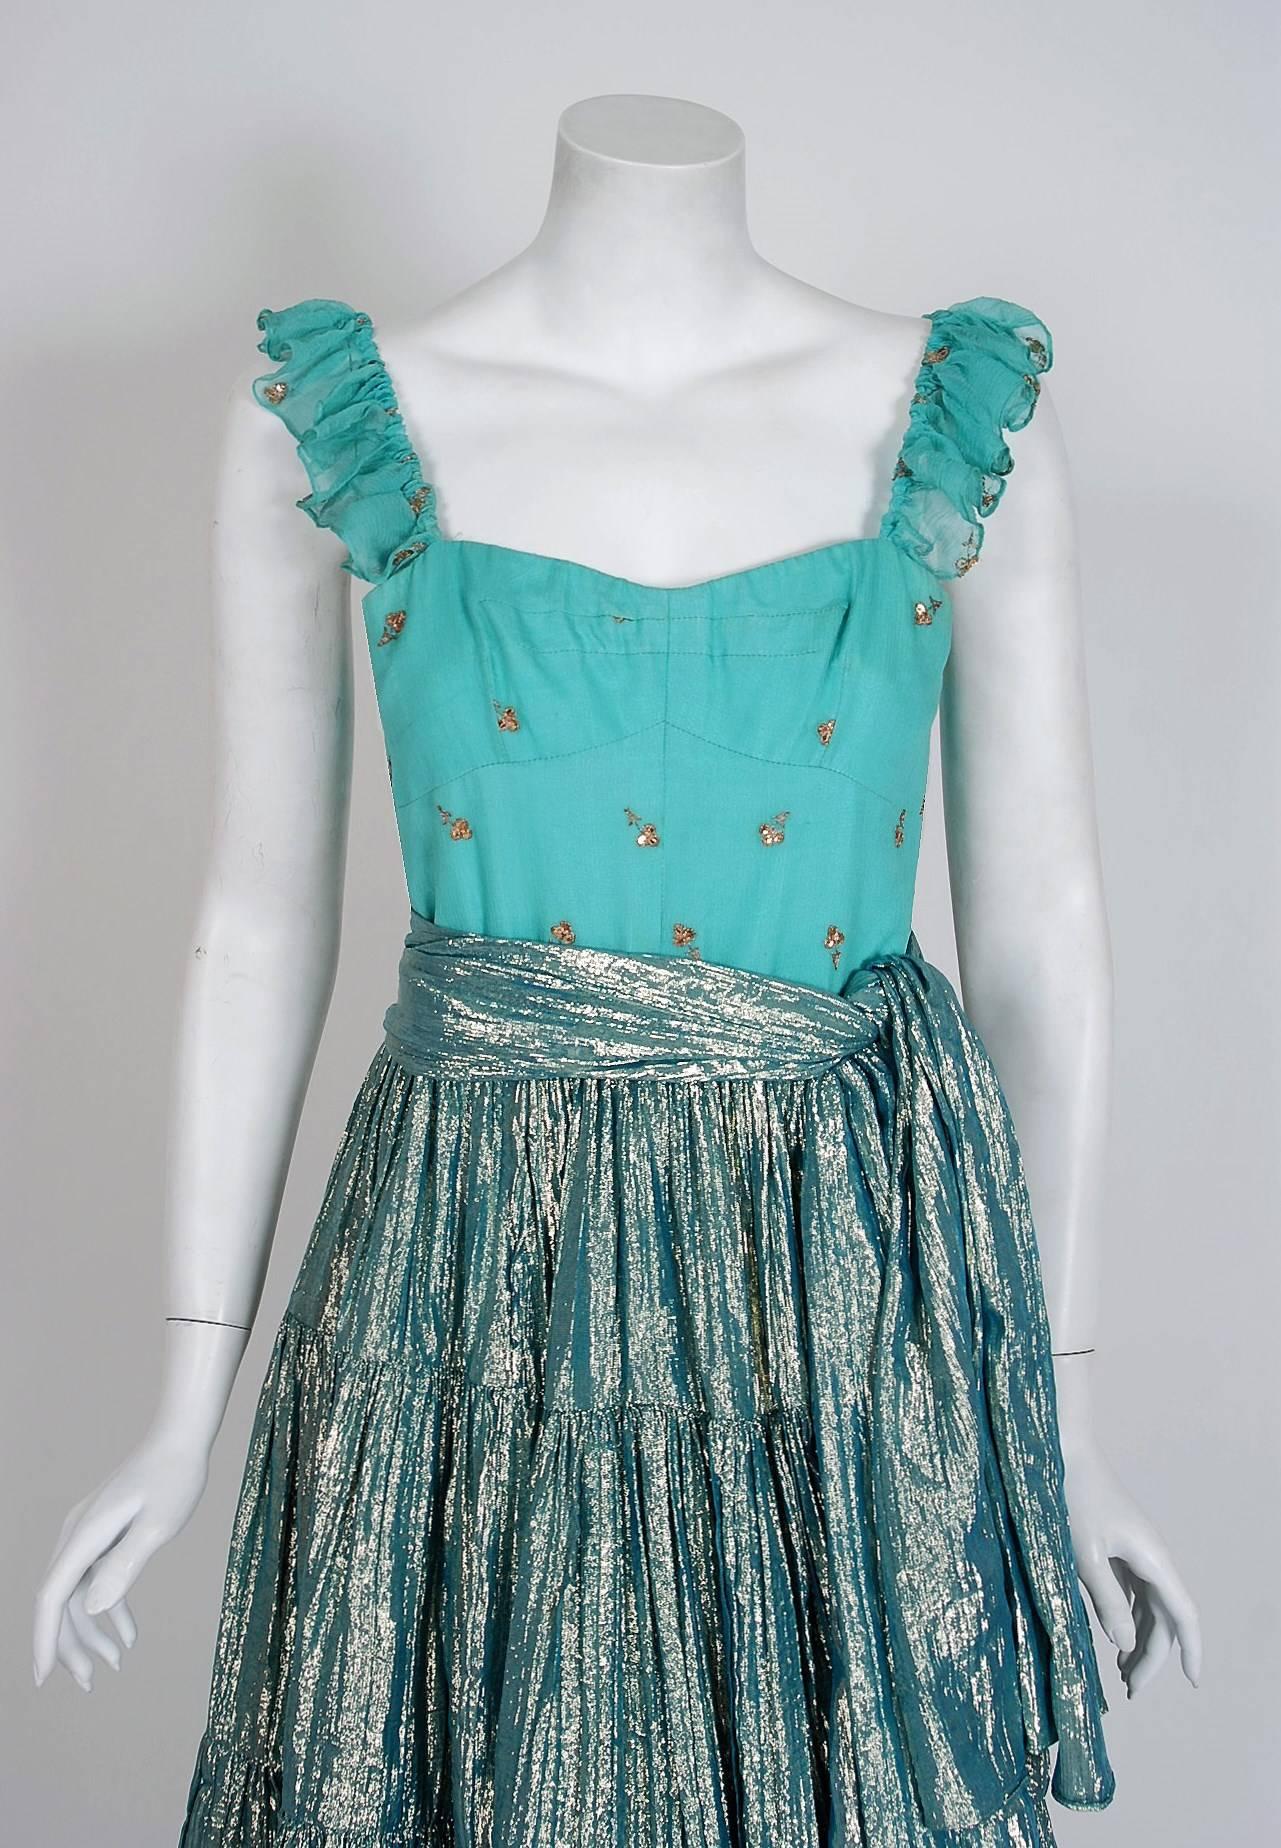 Blue 1977 Thea Porter Couture Metallic Embroidered Silk Lamé Gypsy Dress & Jacket